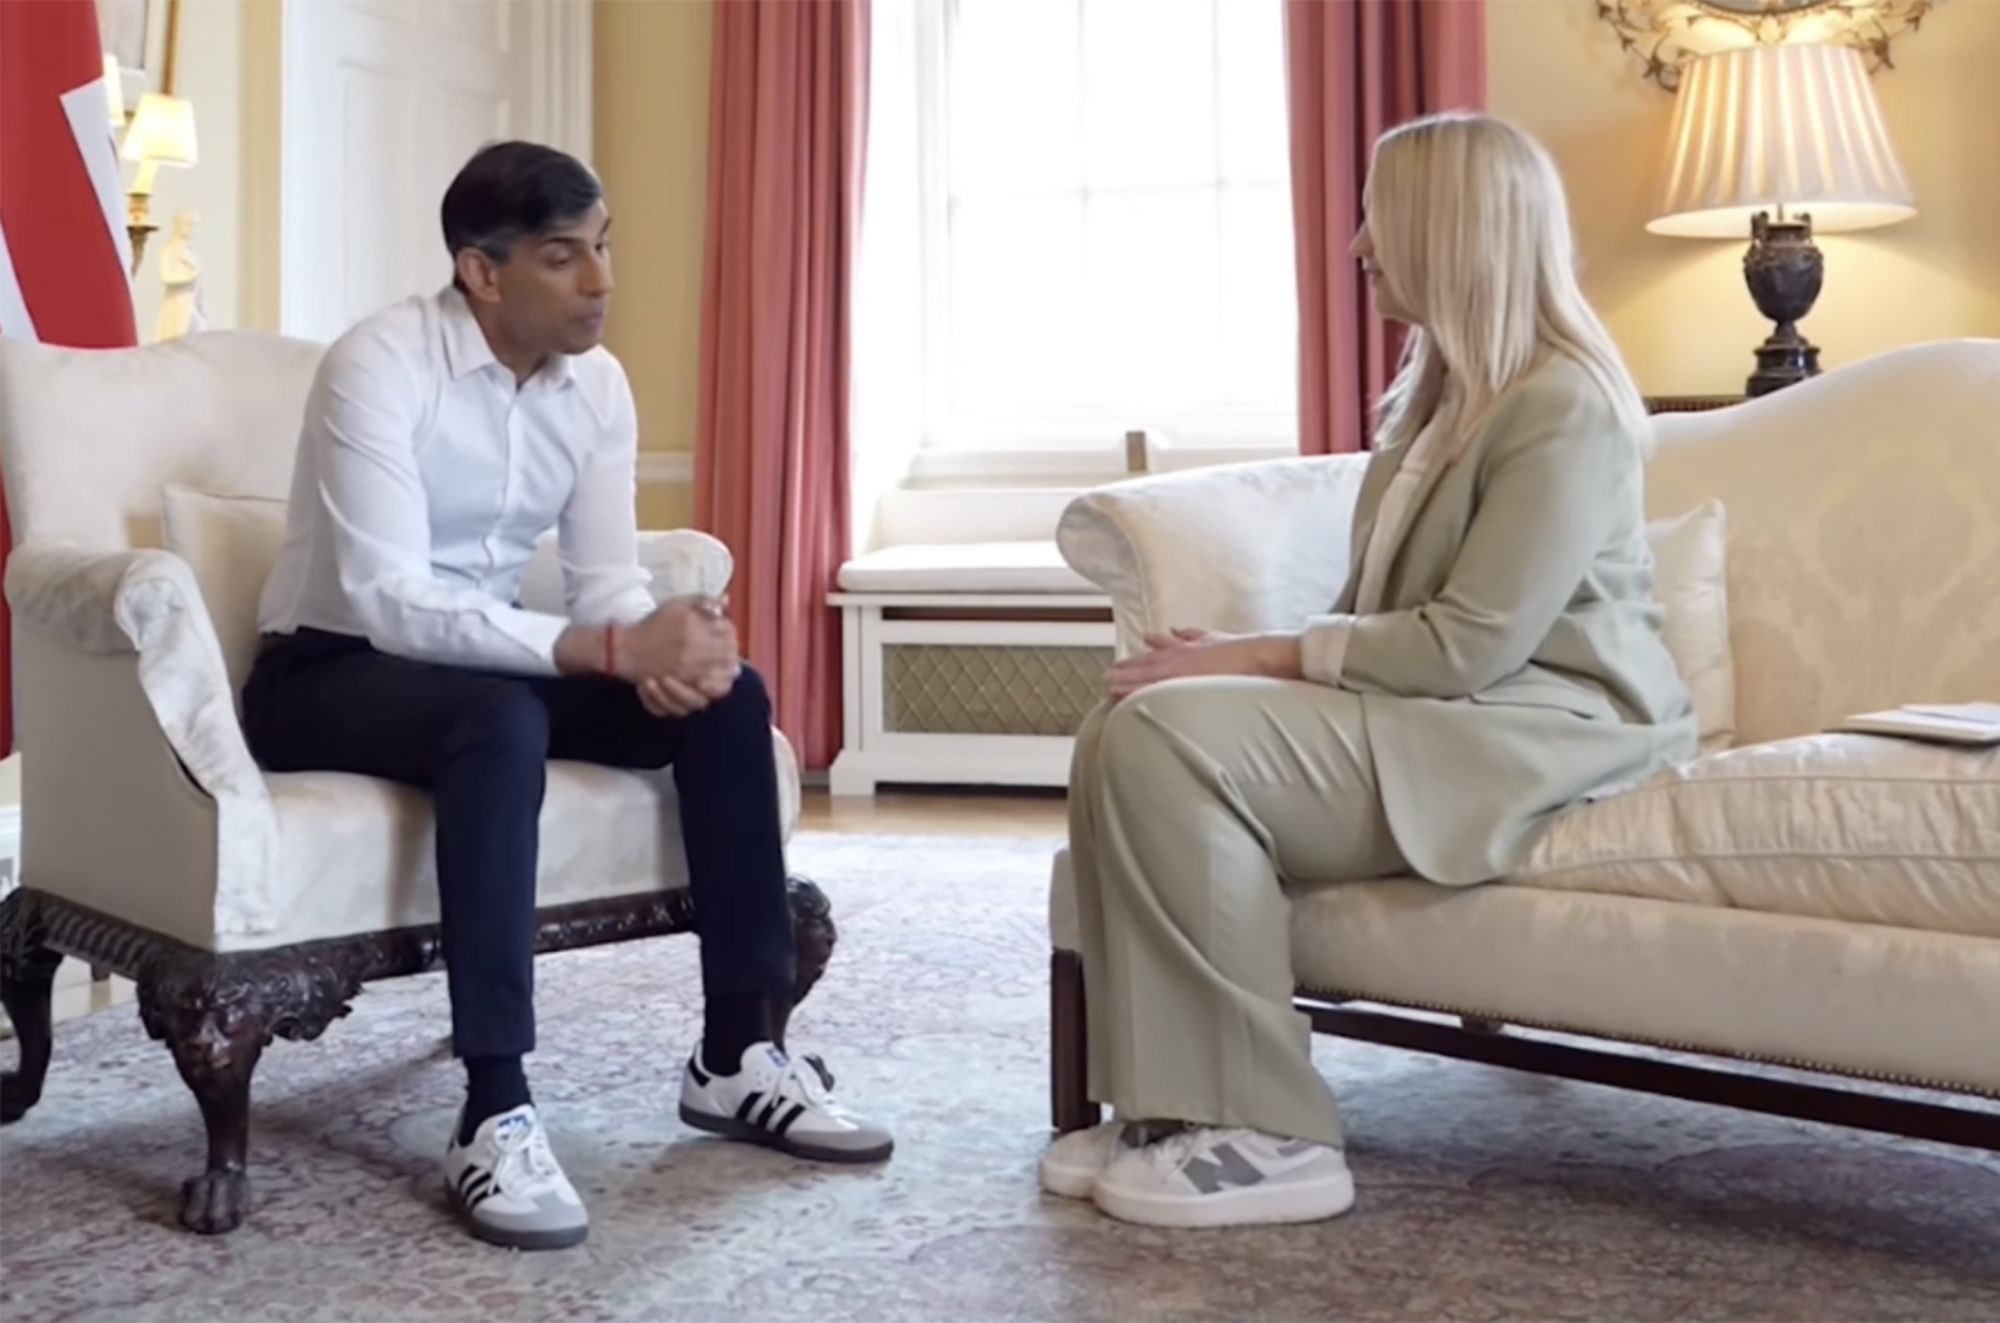 A video of British Prime Minister Rishi Sunak wearing Adidas Samba shoes has caused a furor online.